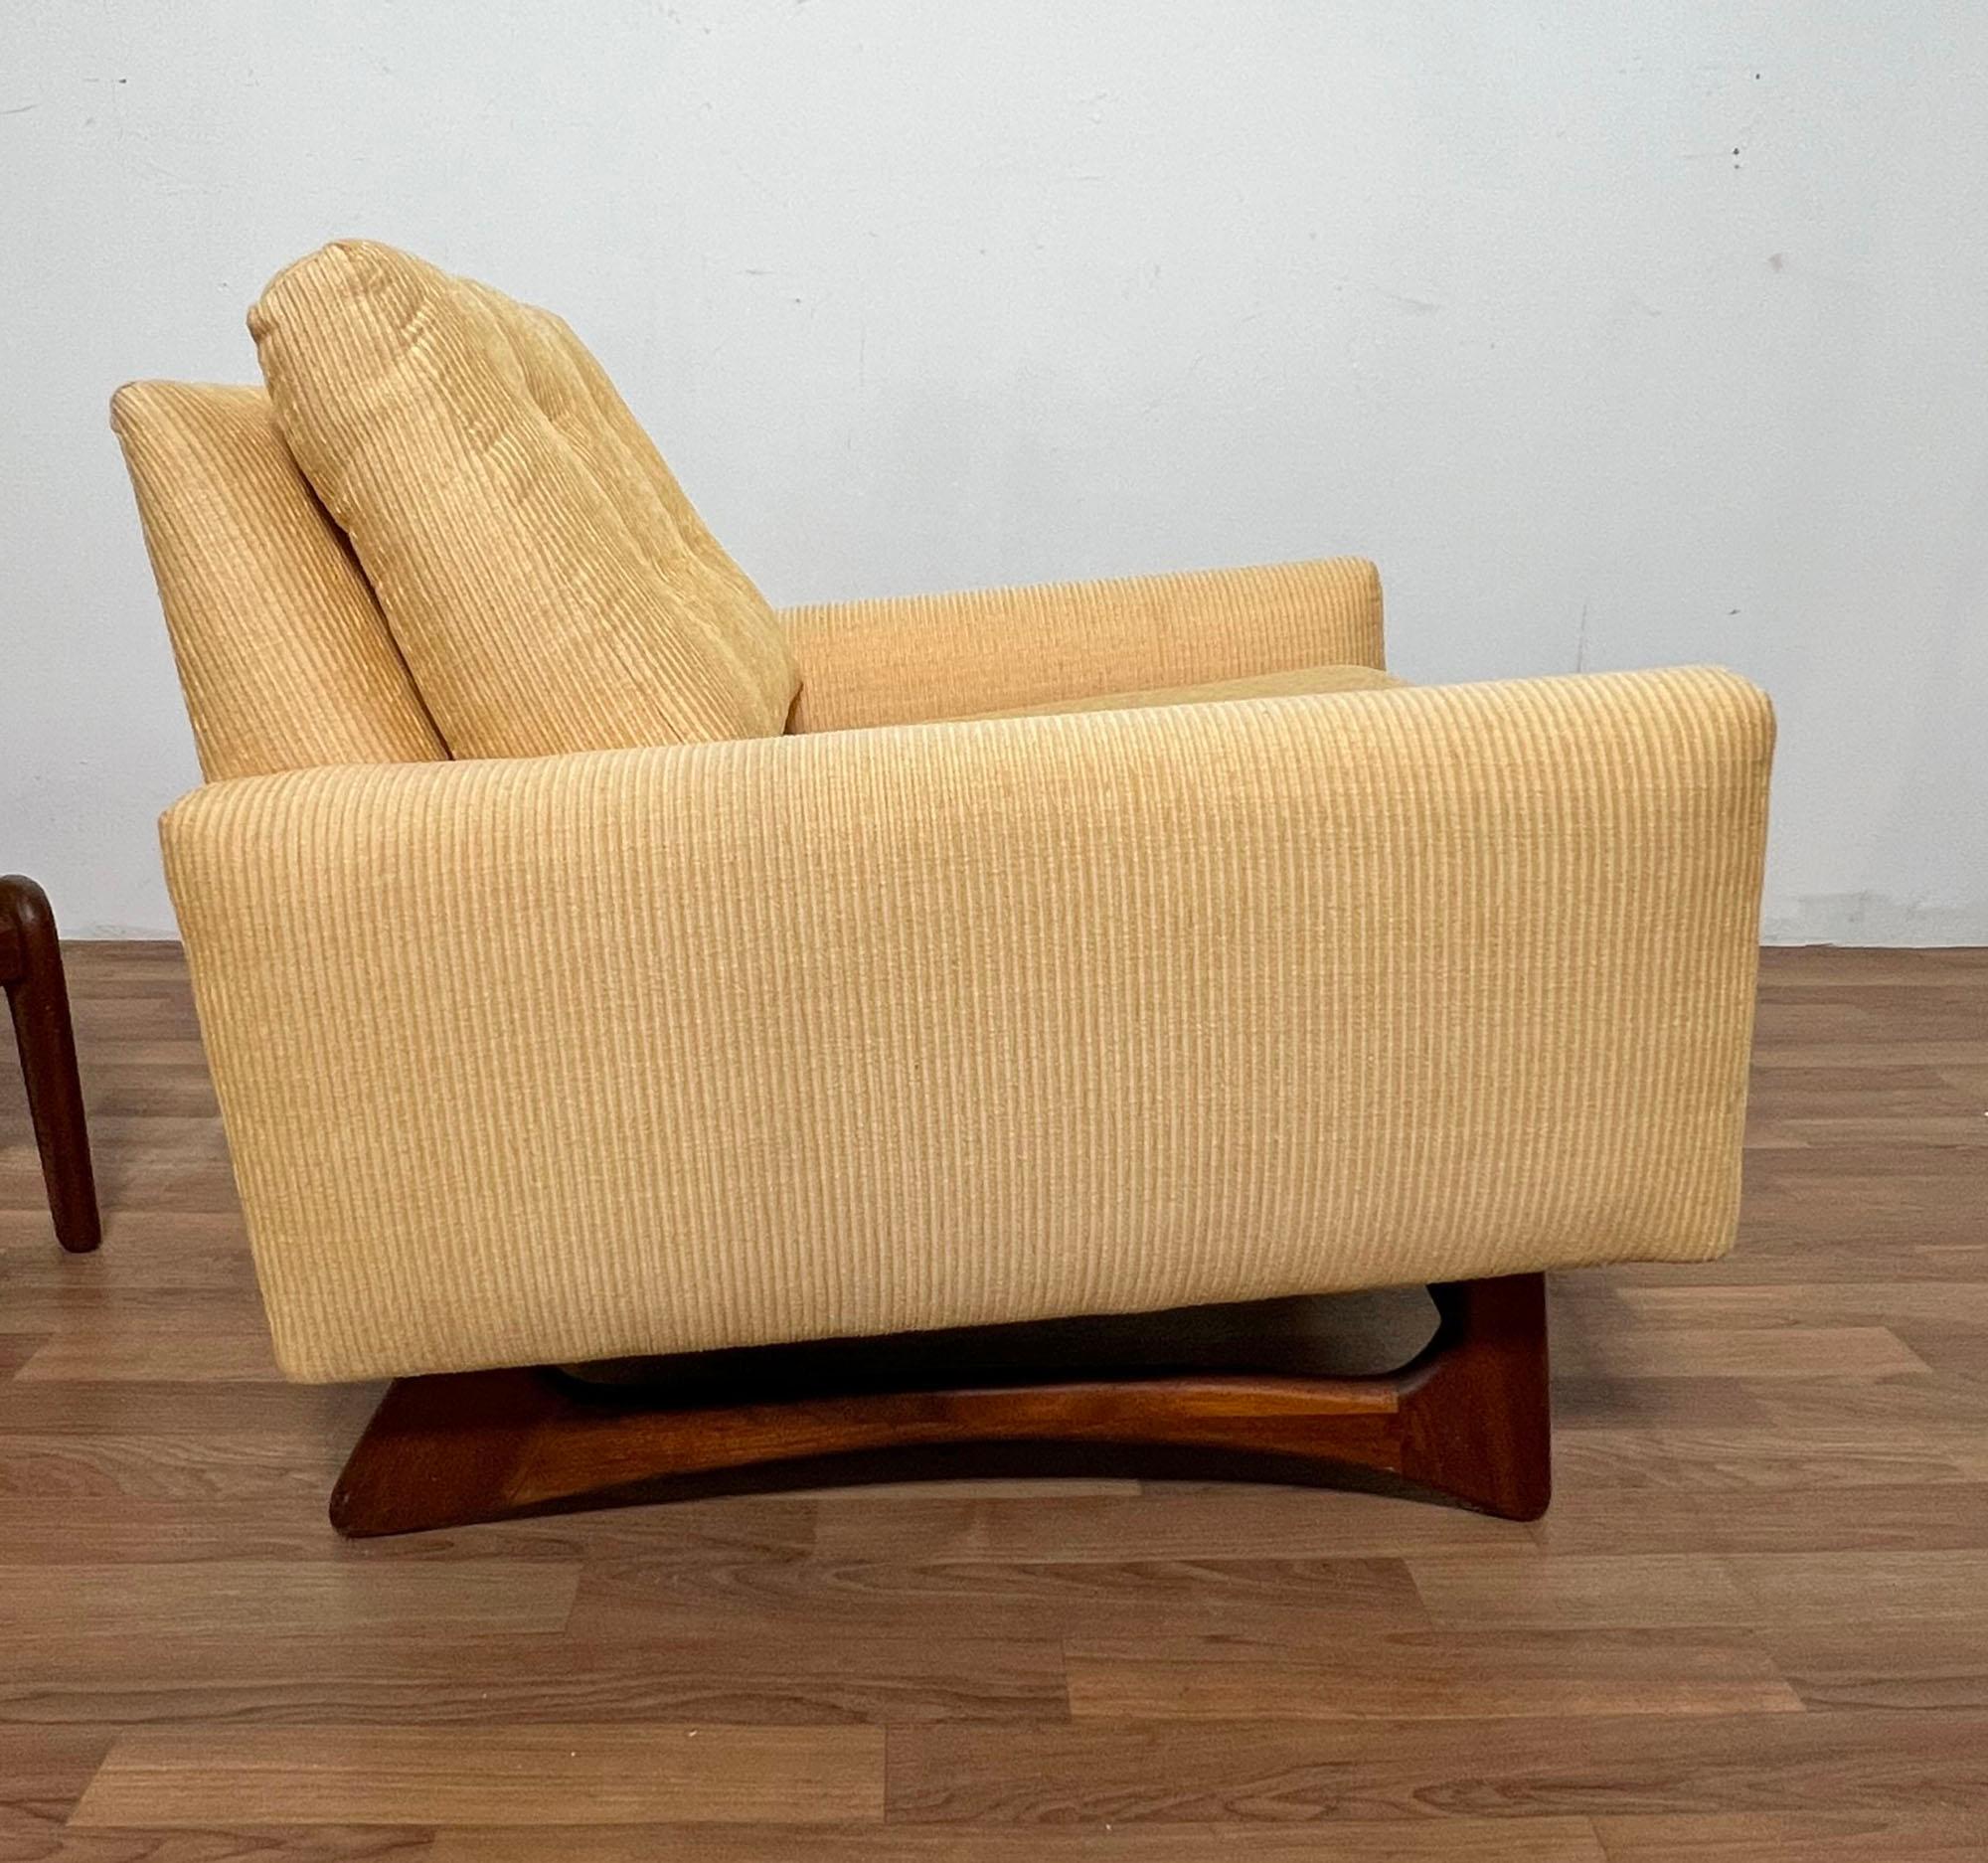 Upholstery Adrian Pearsall for Craft Associates Lounge Chair and Ottoman, circa 1960s For Sale